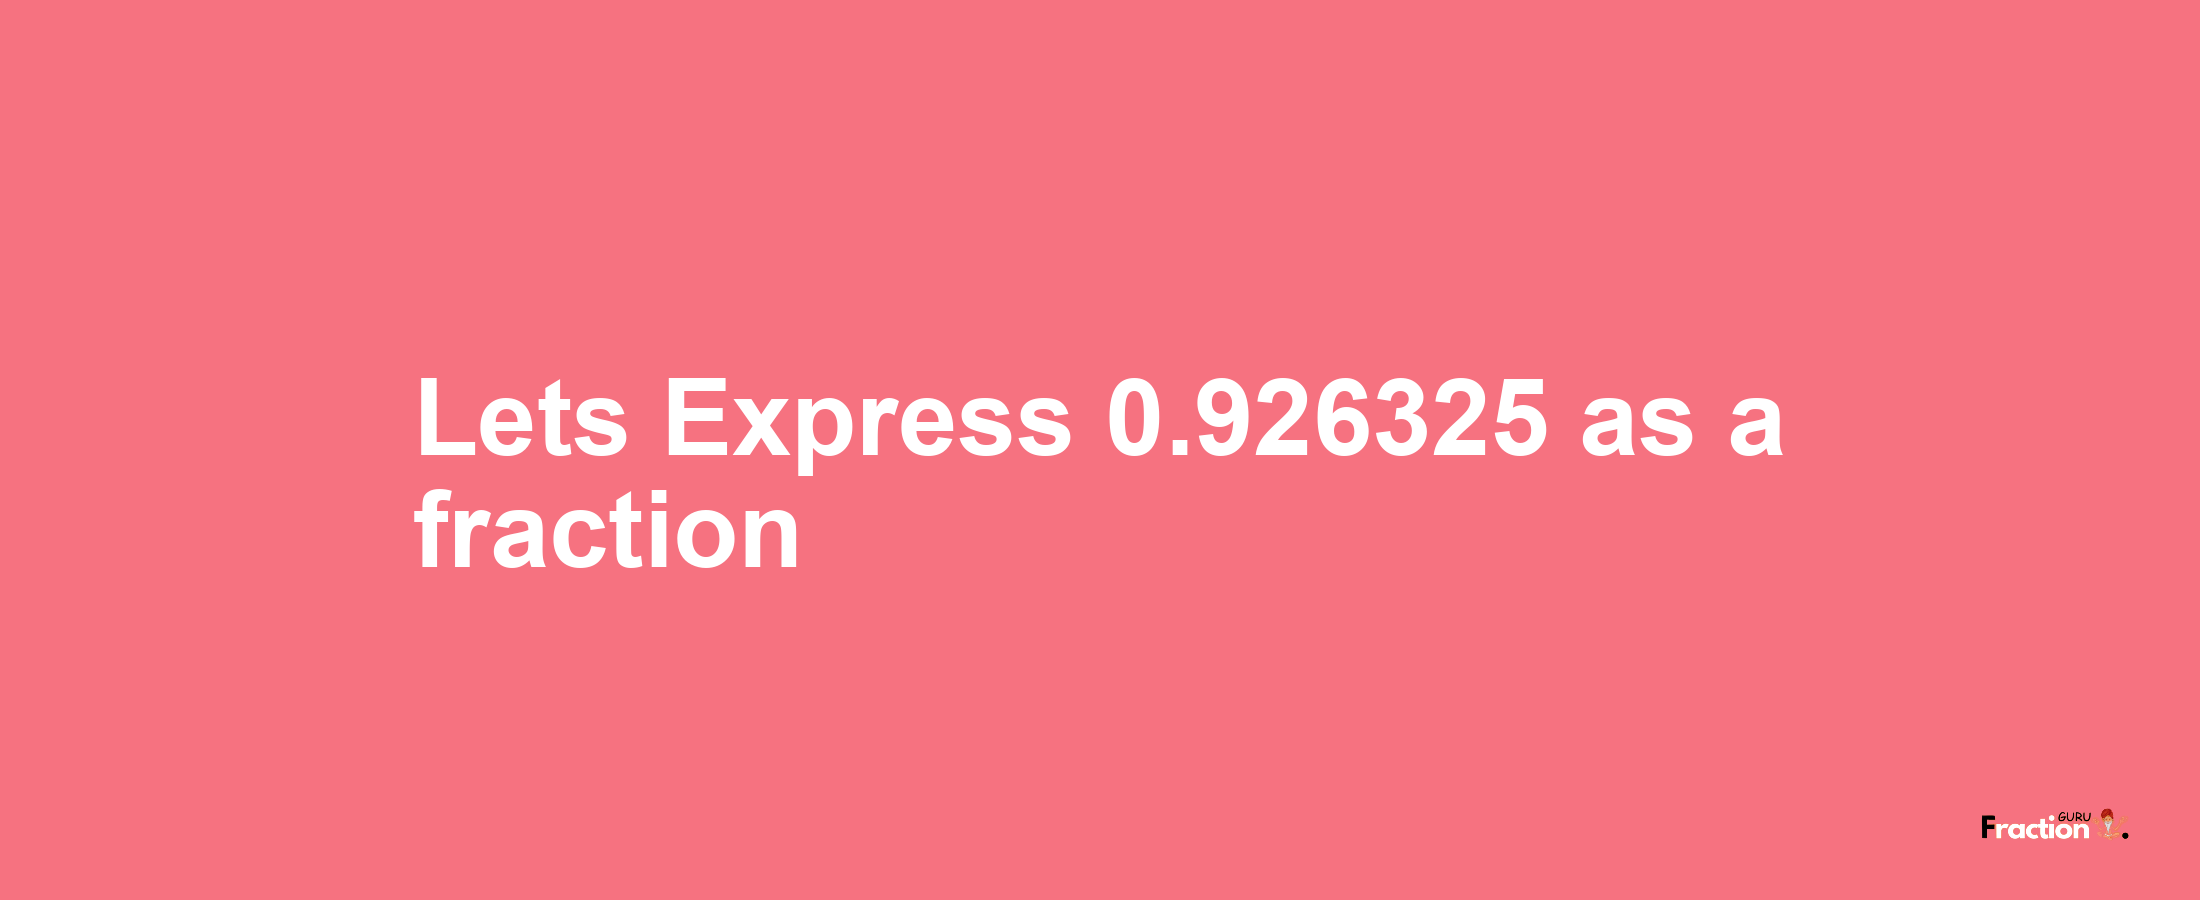 Lets Express 0.926325 as afraction